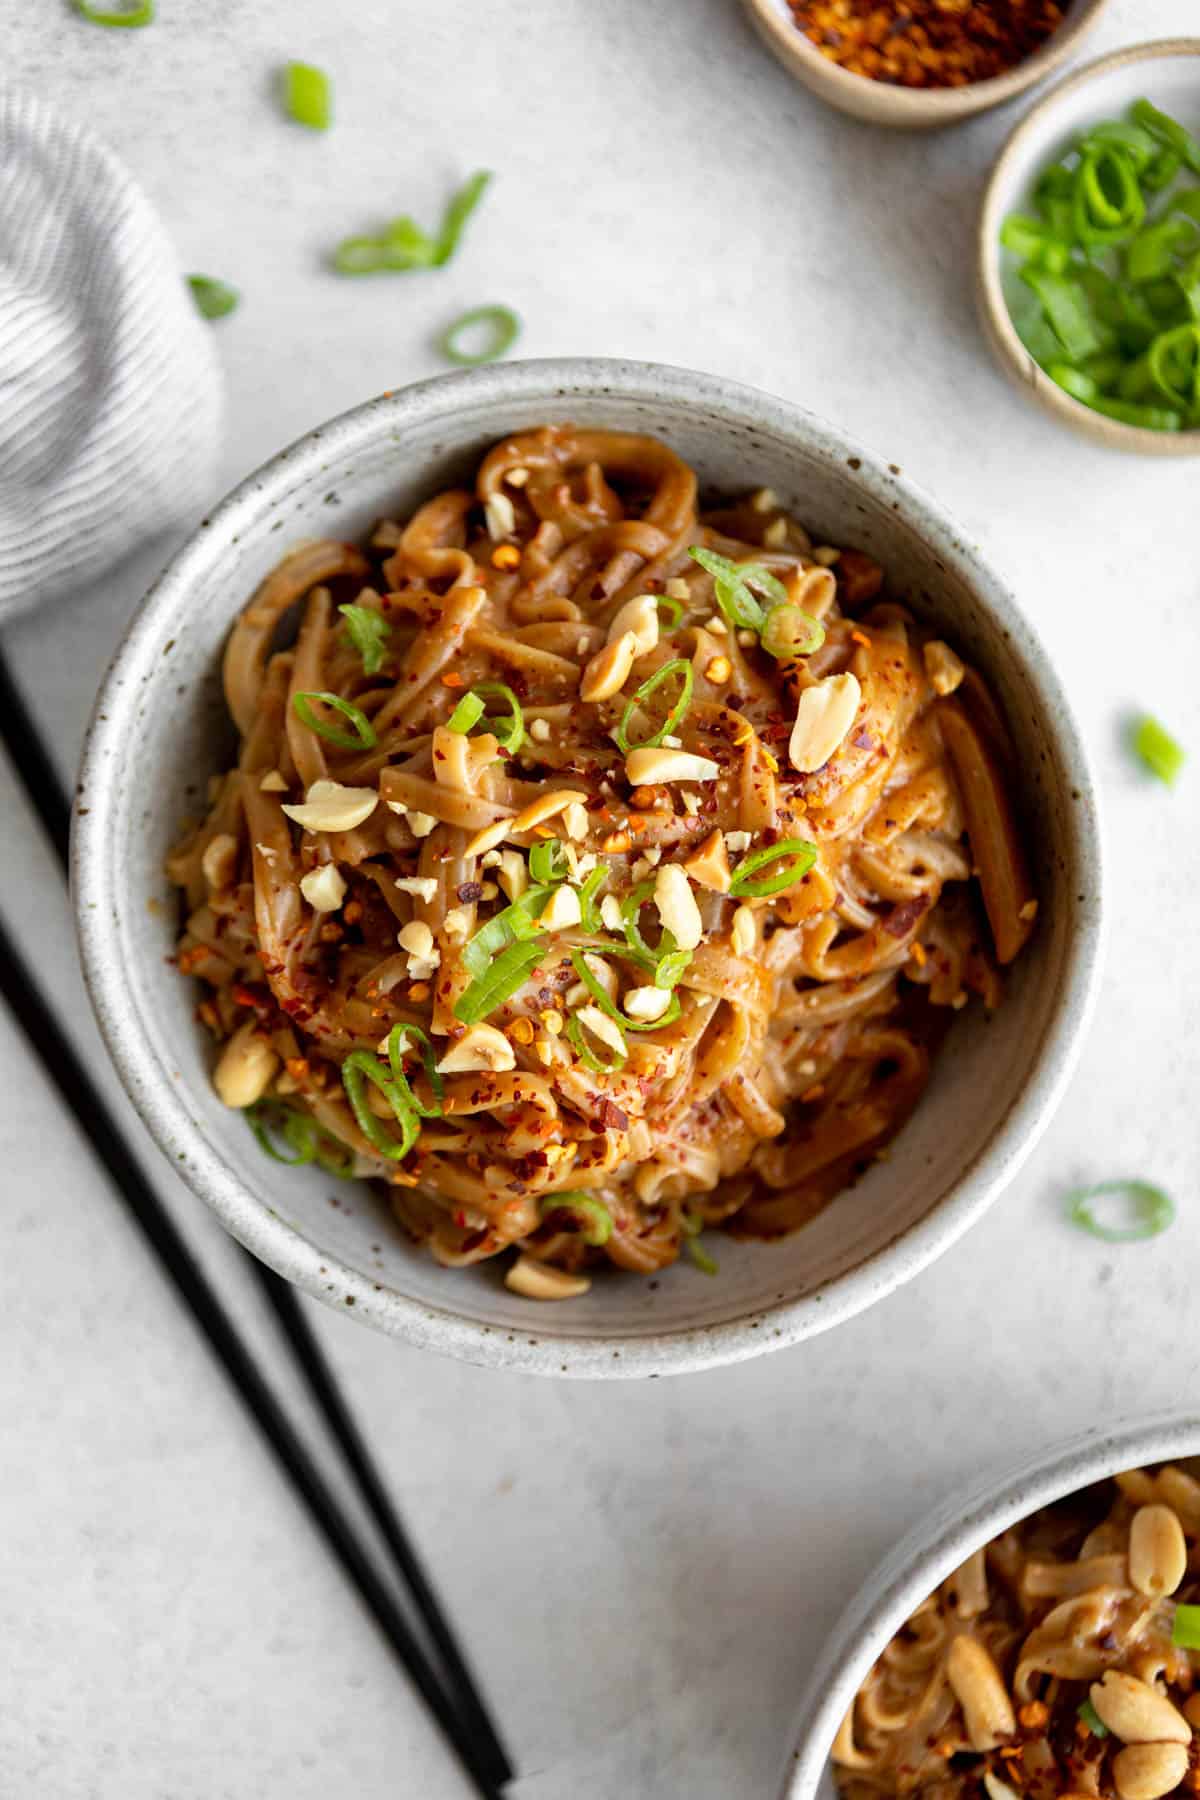 spicy peanut butter noodles in a bowl with green onion